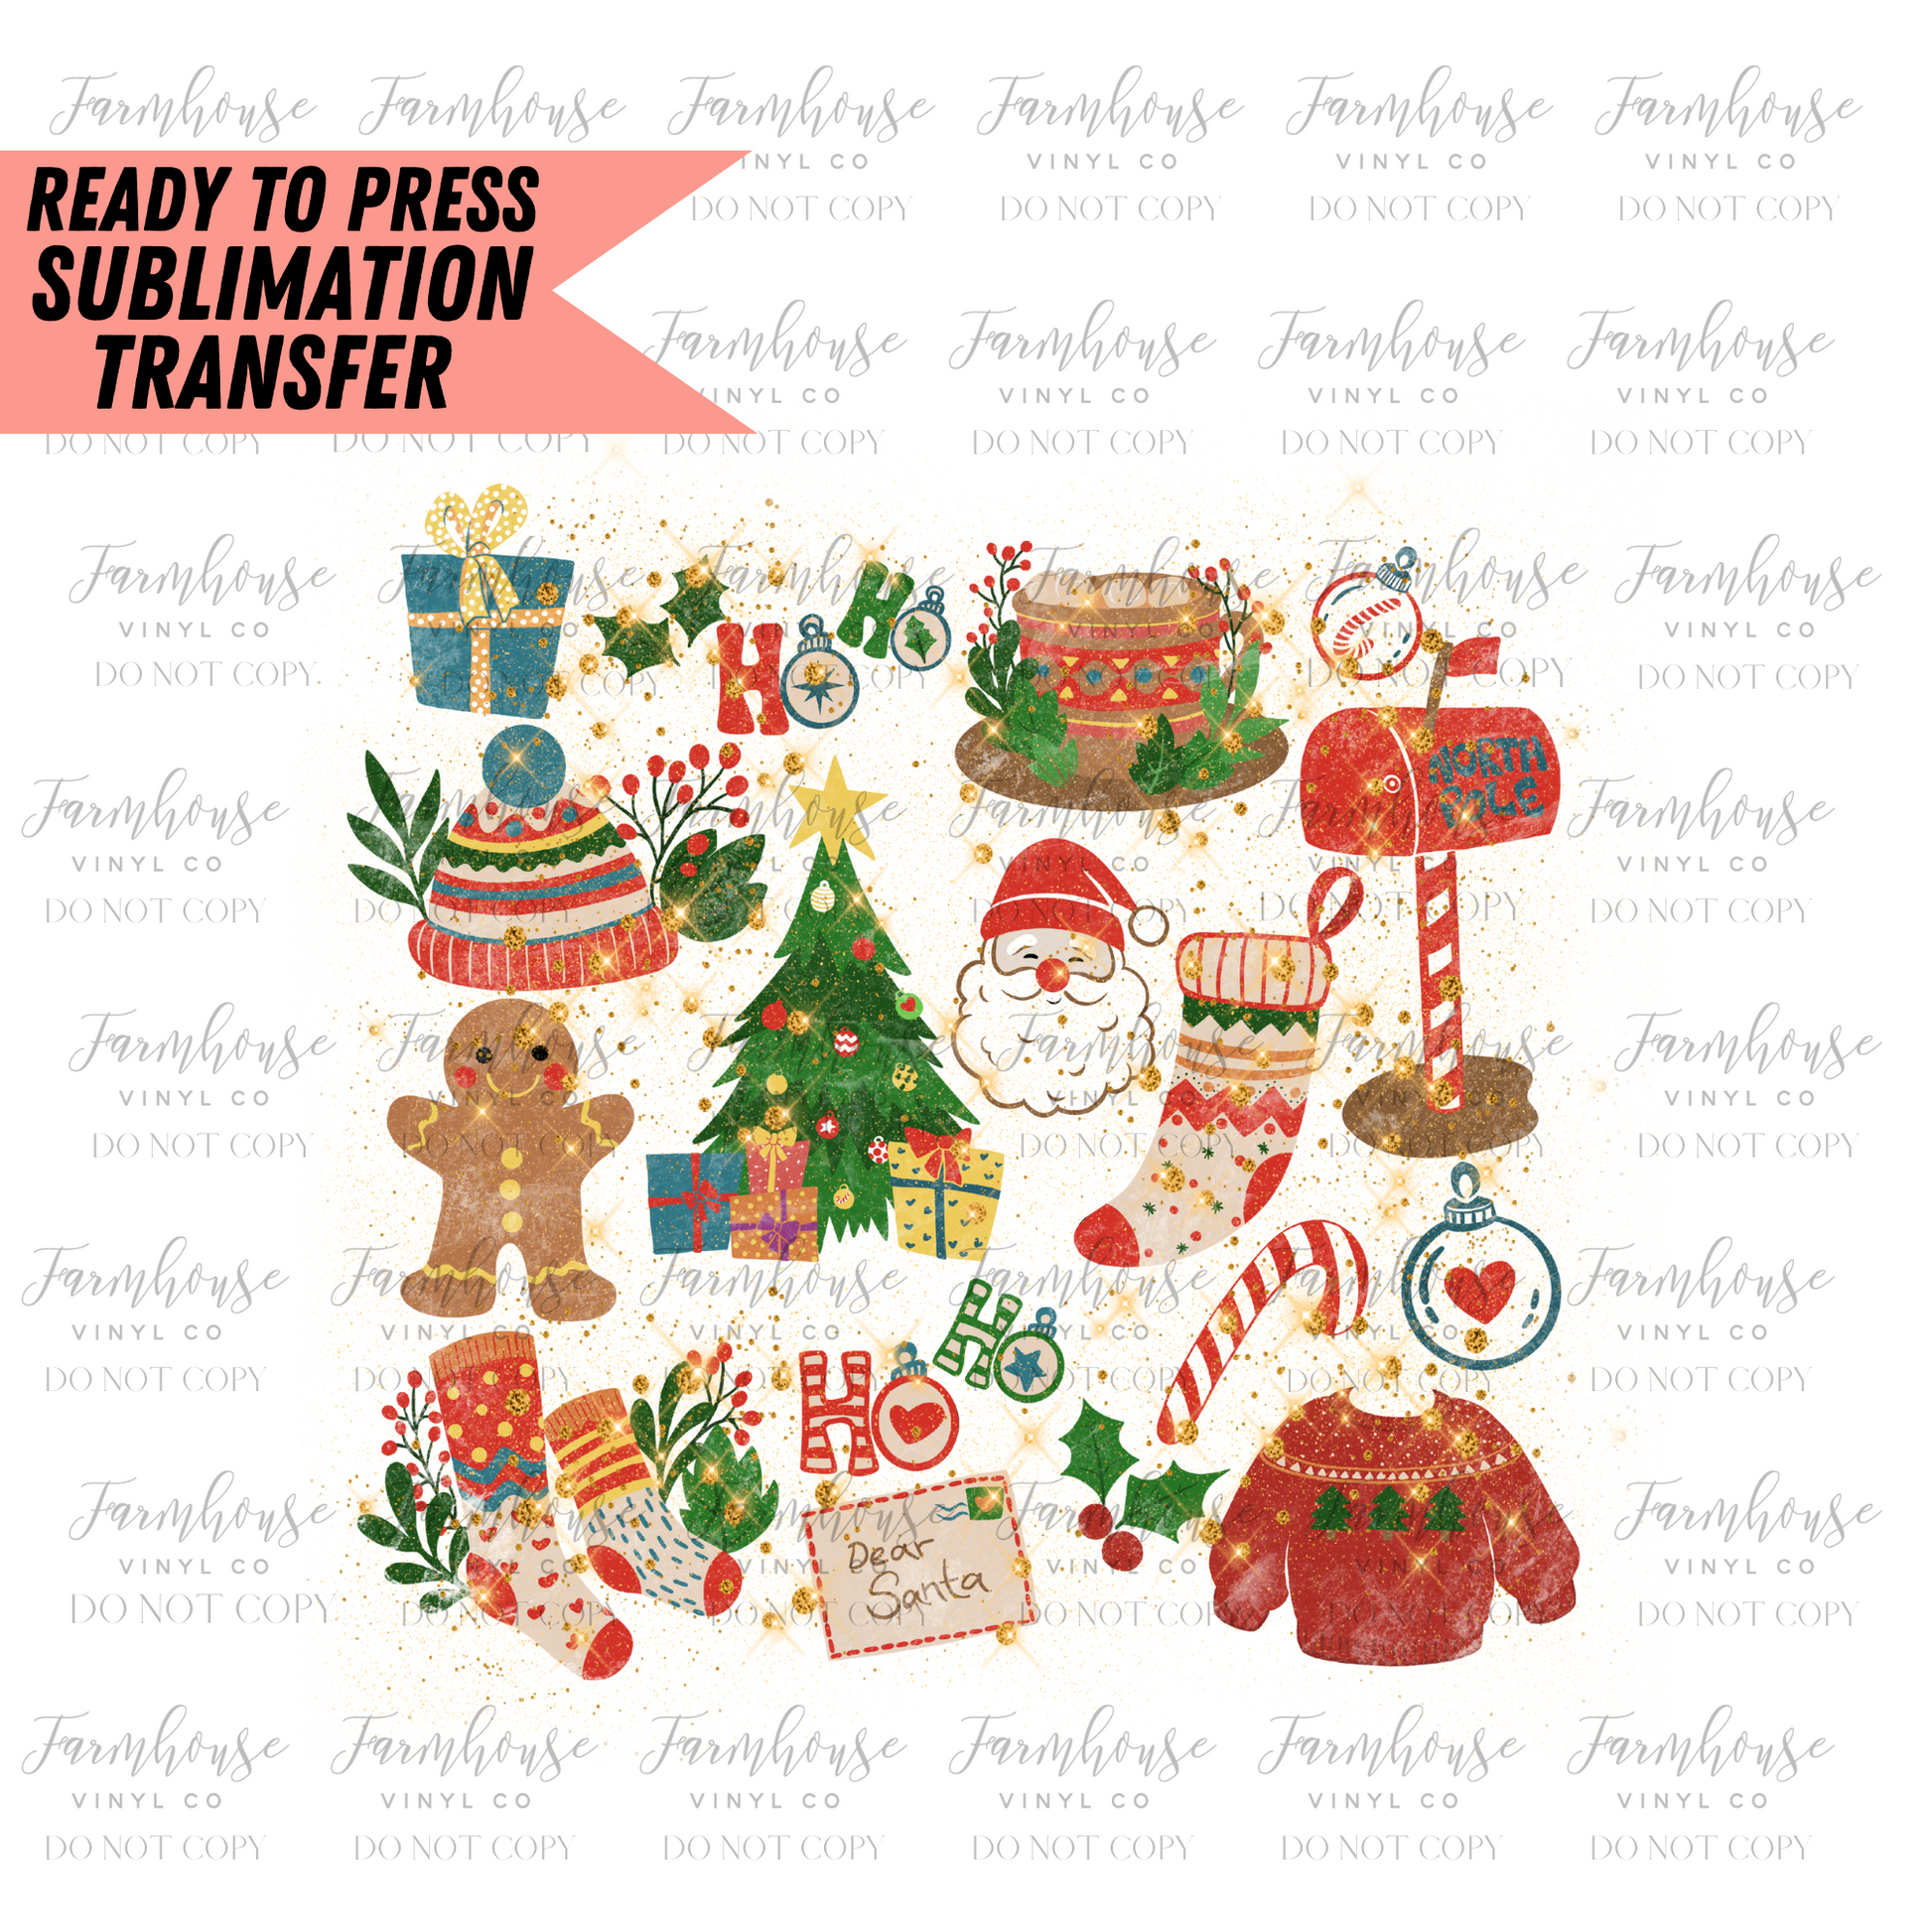 Sparkly Christmas Favorite Things Ready To Press Sublimation Transfer - Farmhouse Vinyl Co